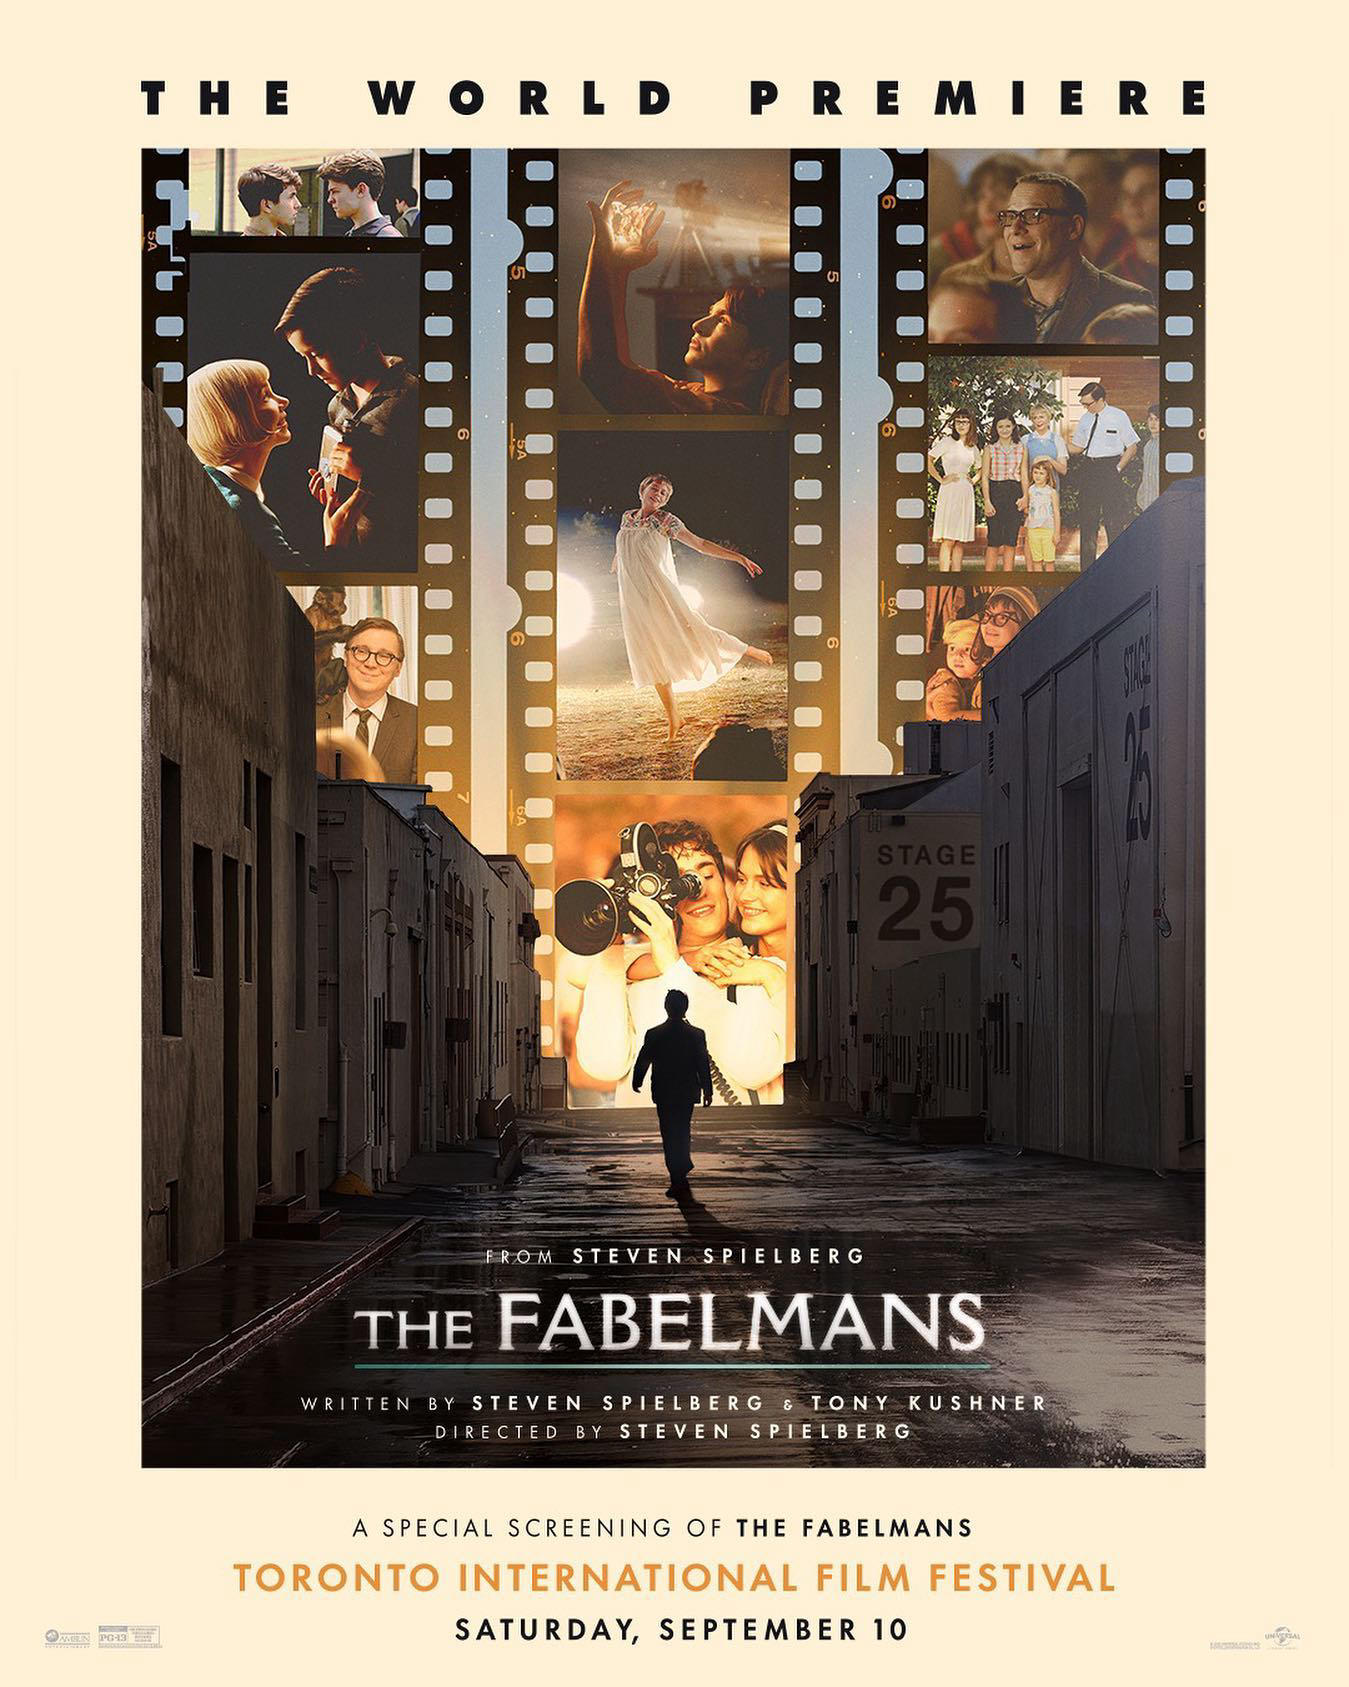 Universal Pictures - From Director Steven Spielberg #TheFabelmans in select theaters November 11